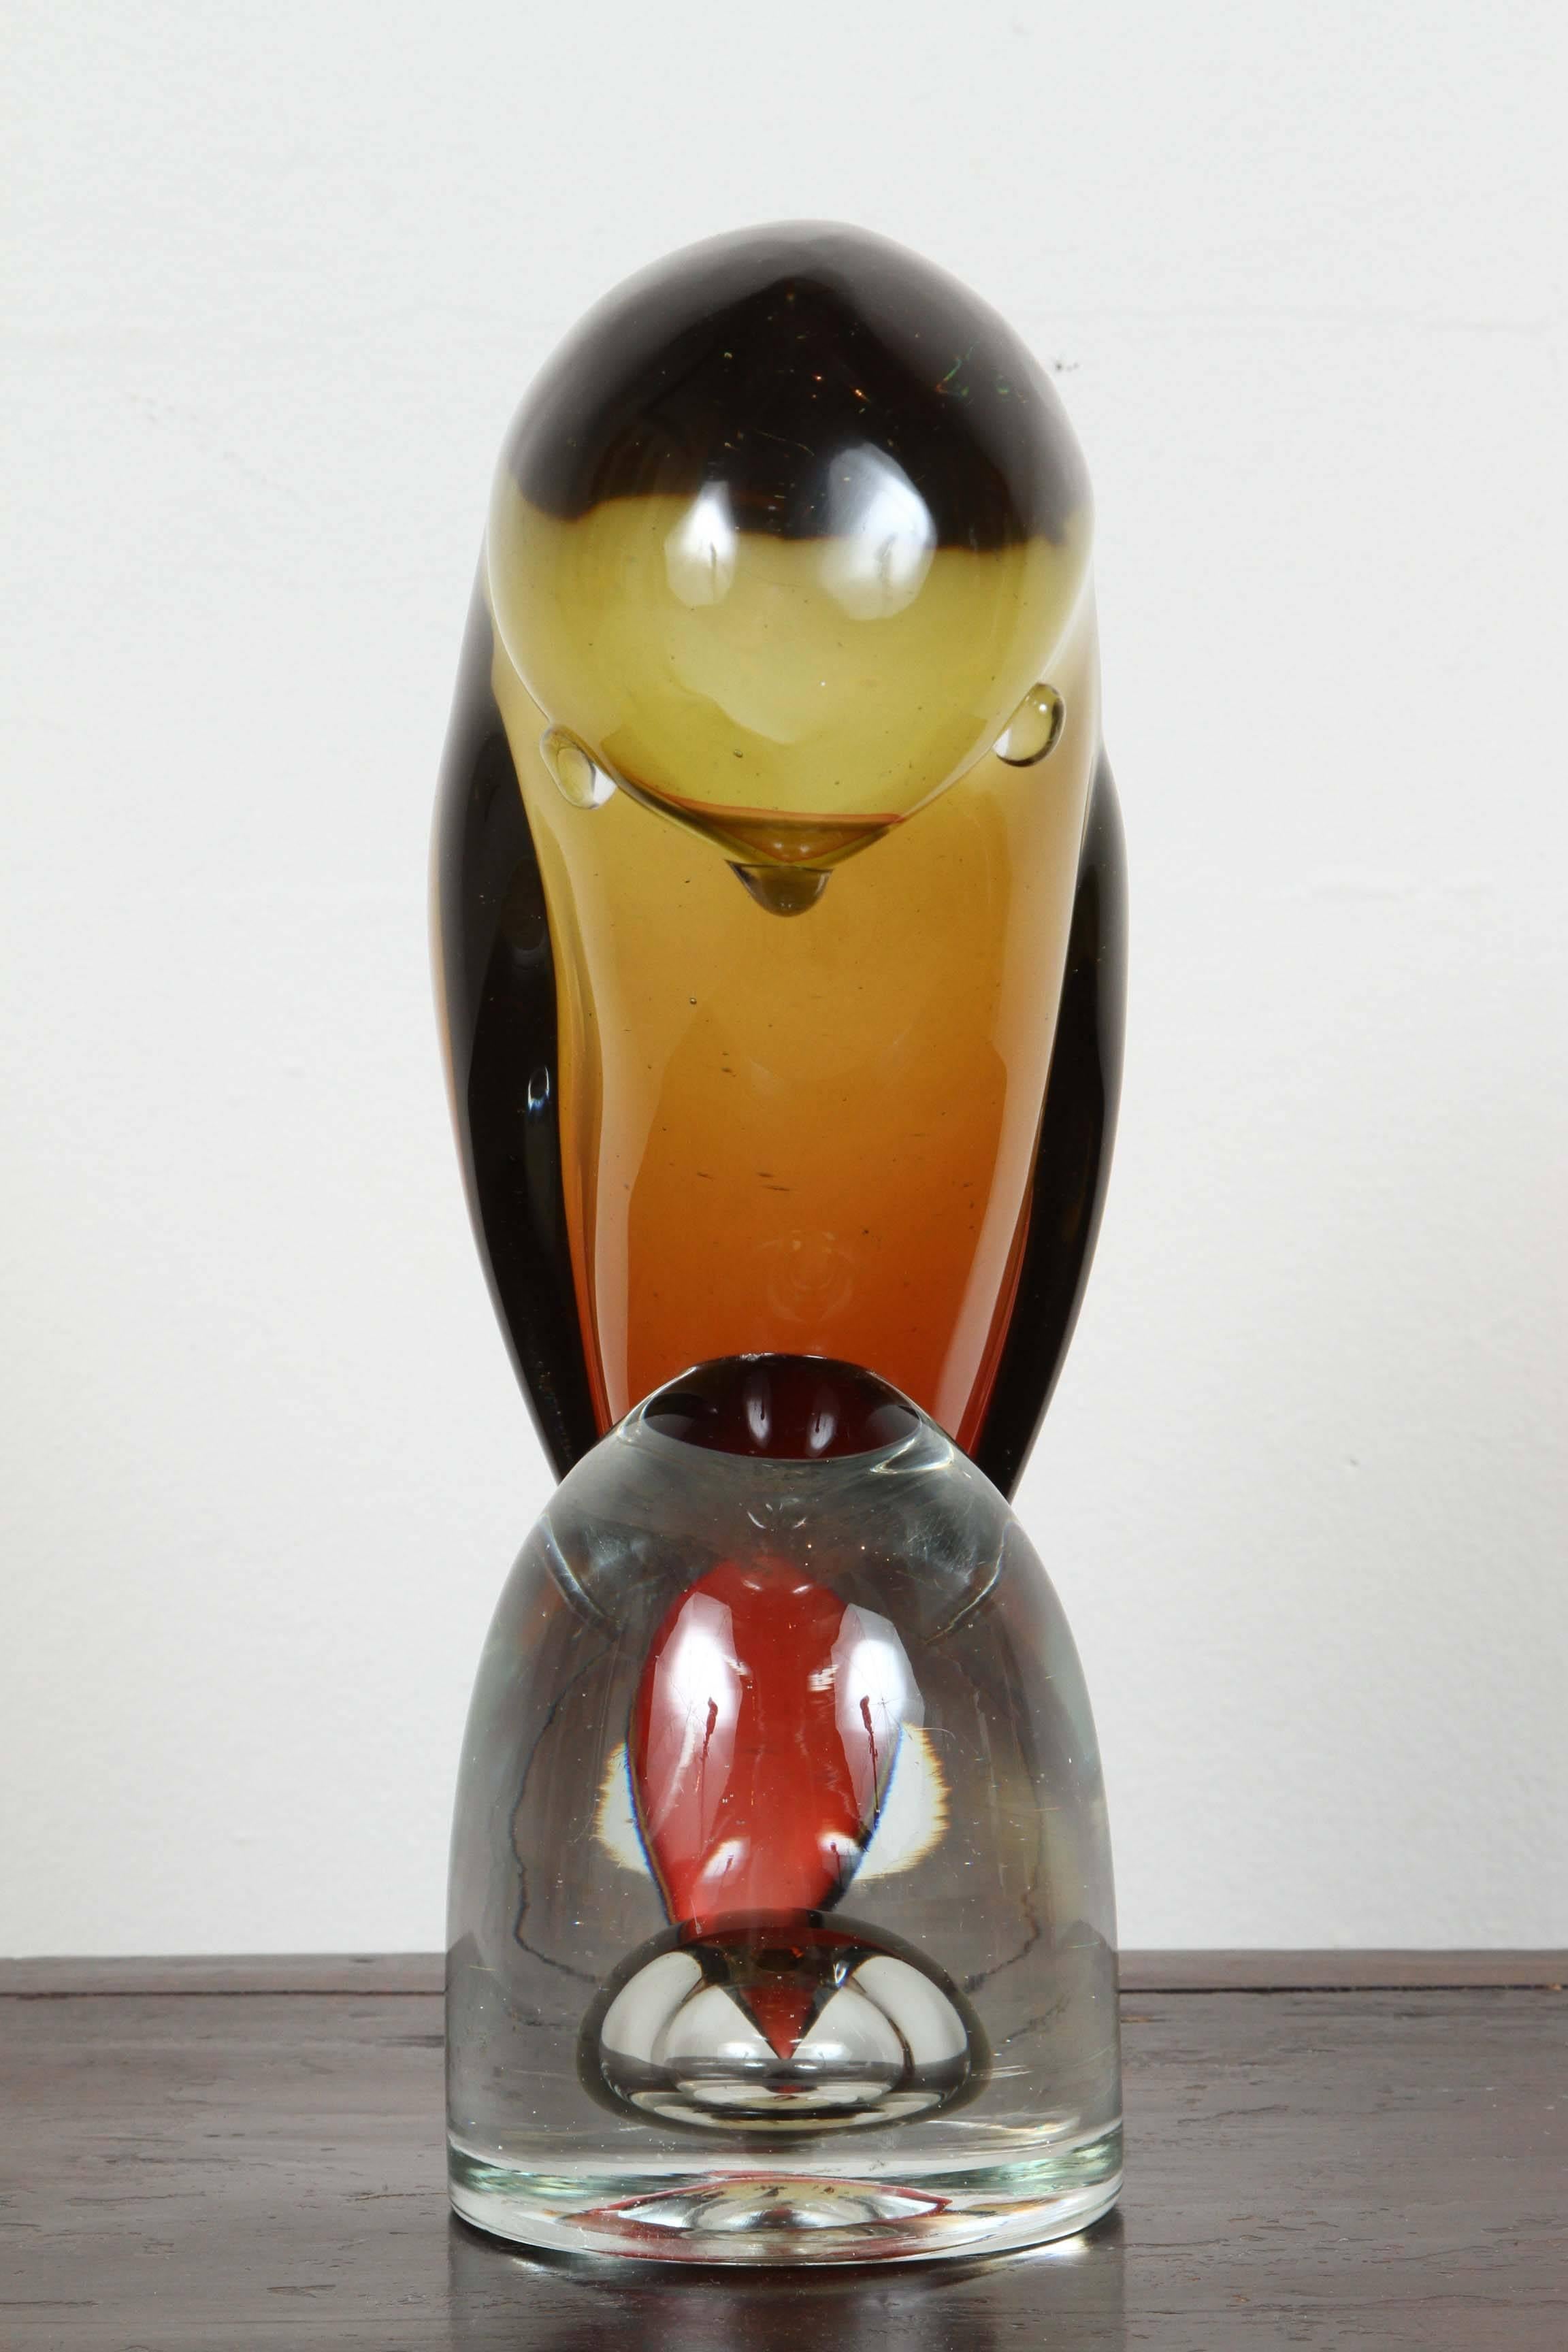 Salviati & Co. Murano Glass Bird, Yellow and Orange In Excellent Condition For Sale In Los Angeles, CA